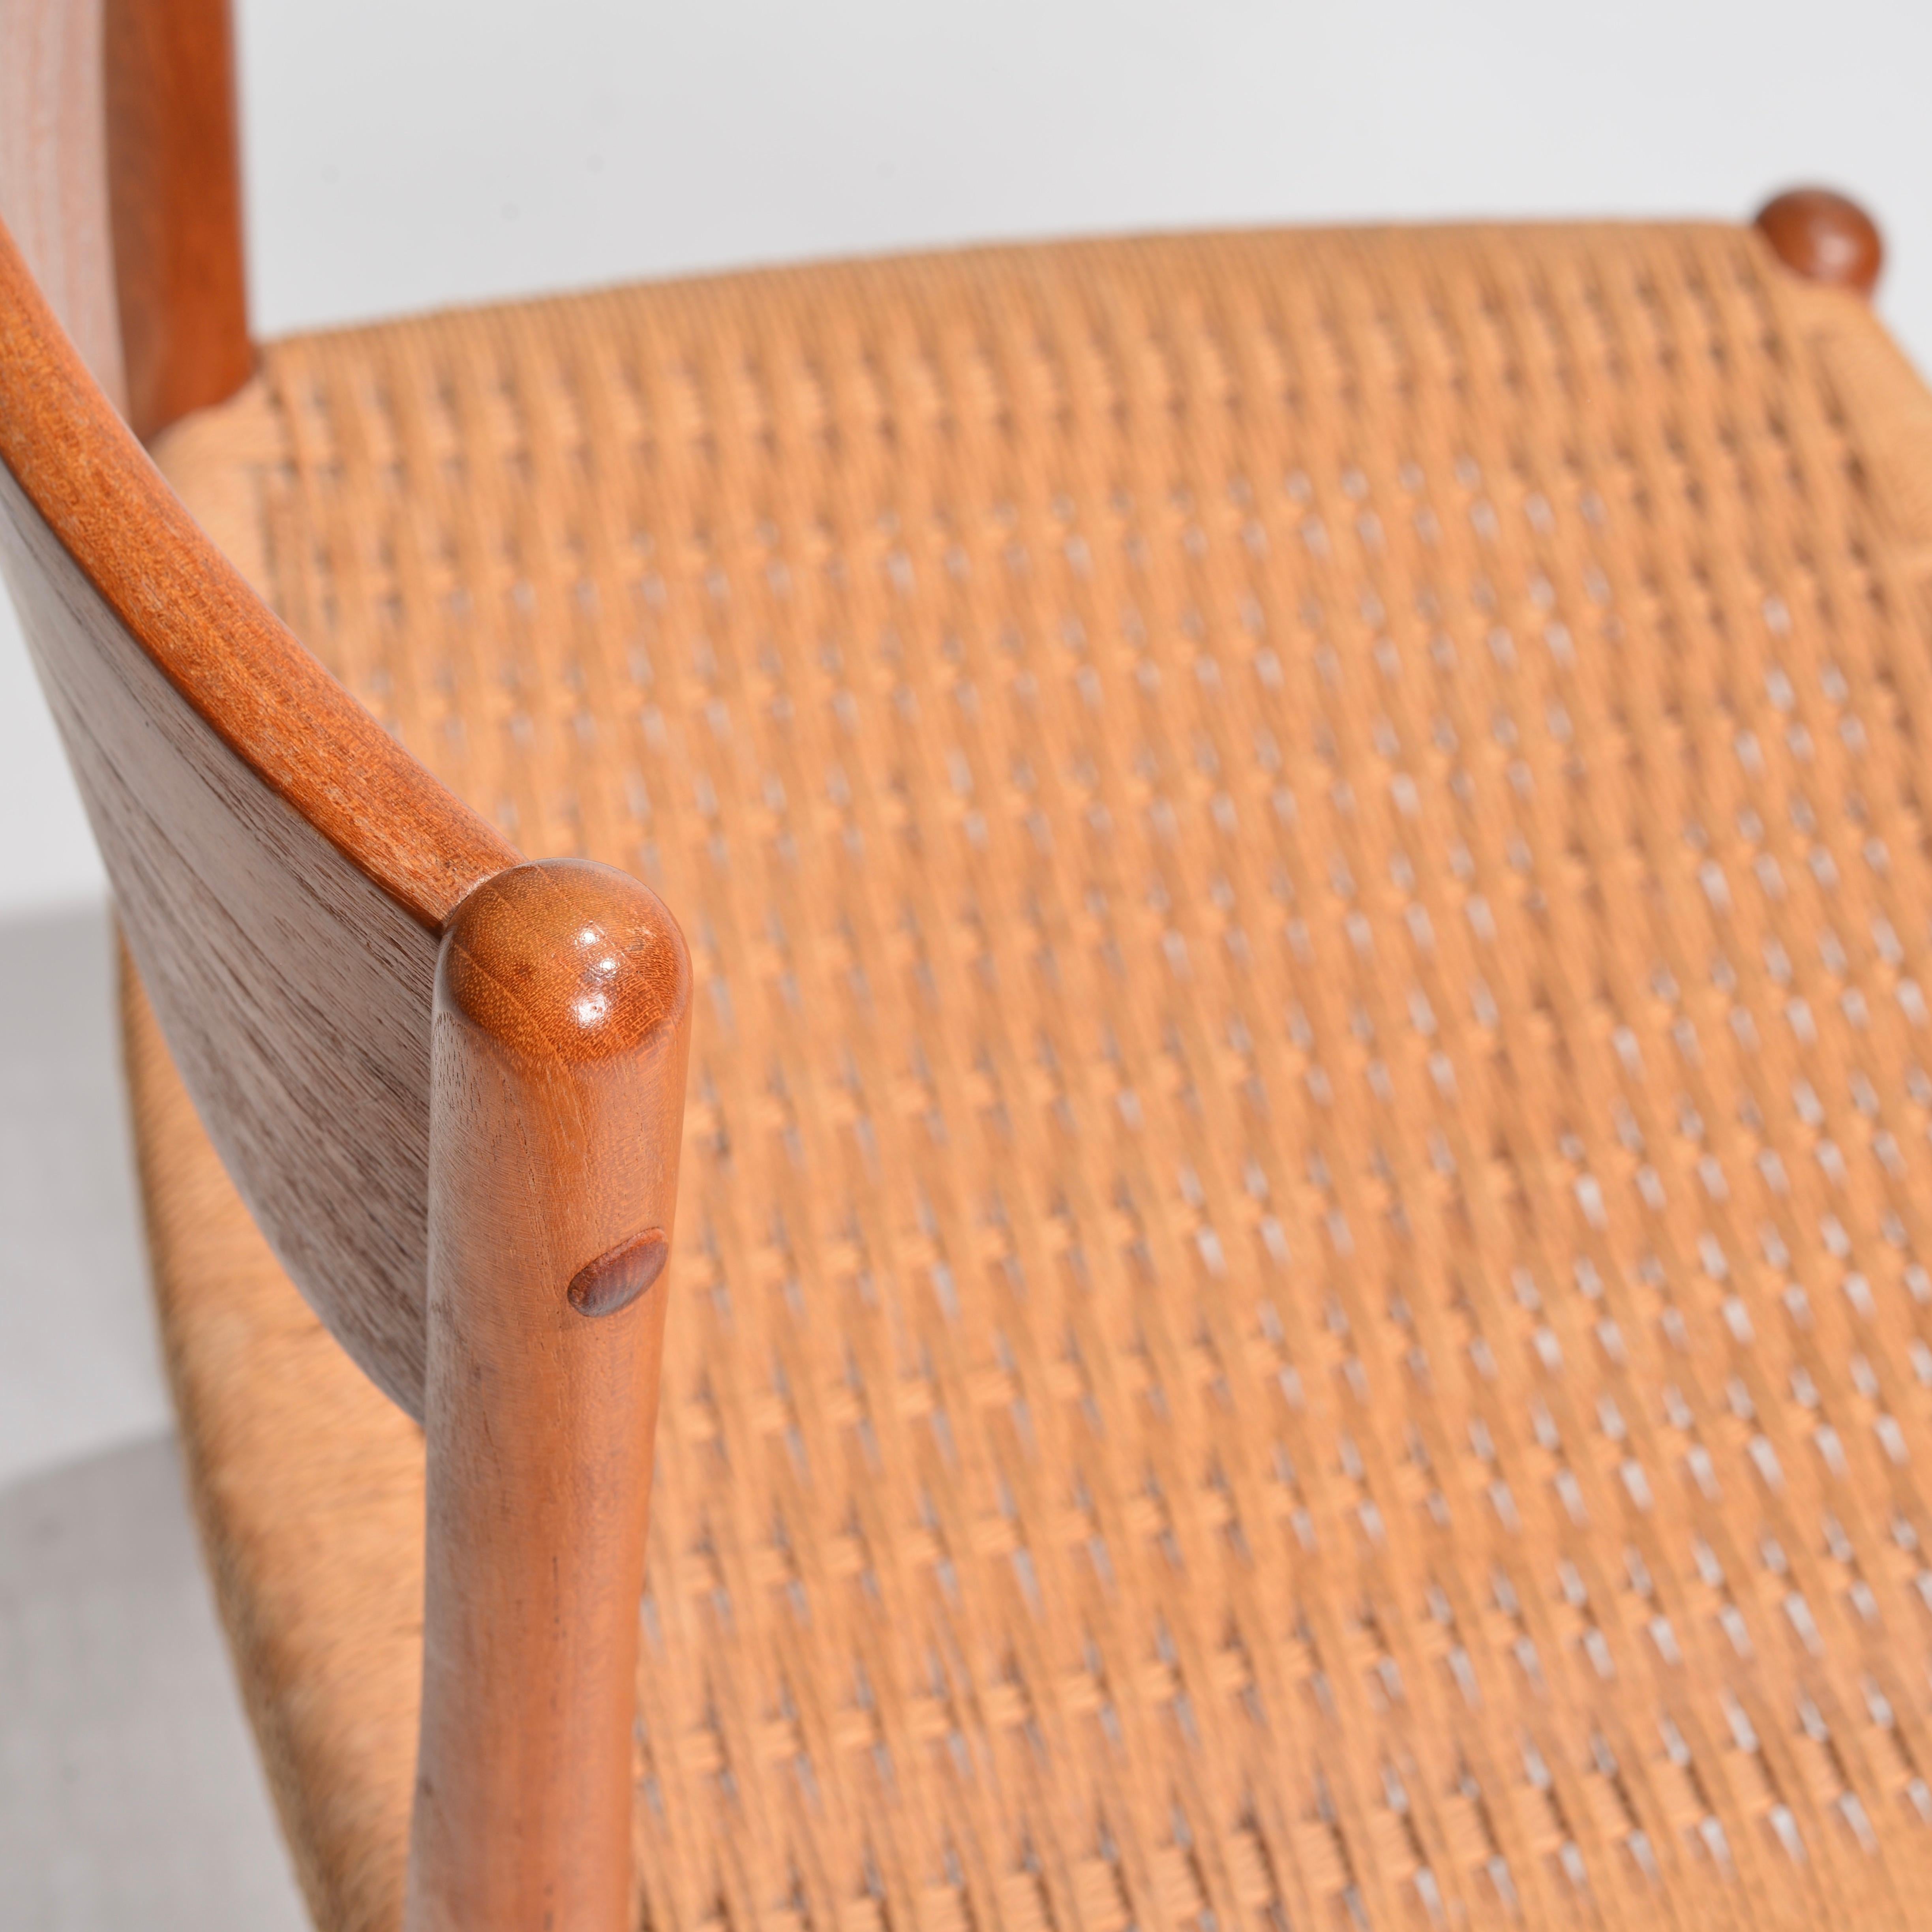 Poul Volther for Frem Rojle Danish Teak Woven Chair Midcentury 1960s In Good Condition For Sale In Los Angeles, CA